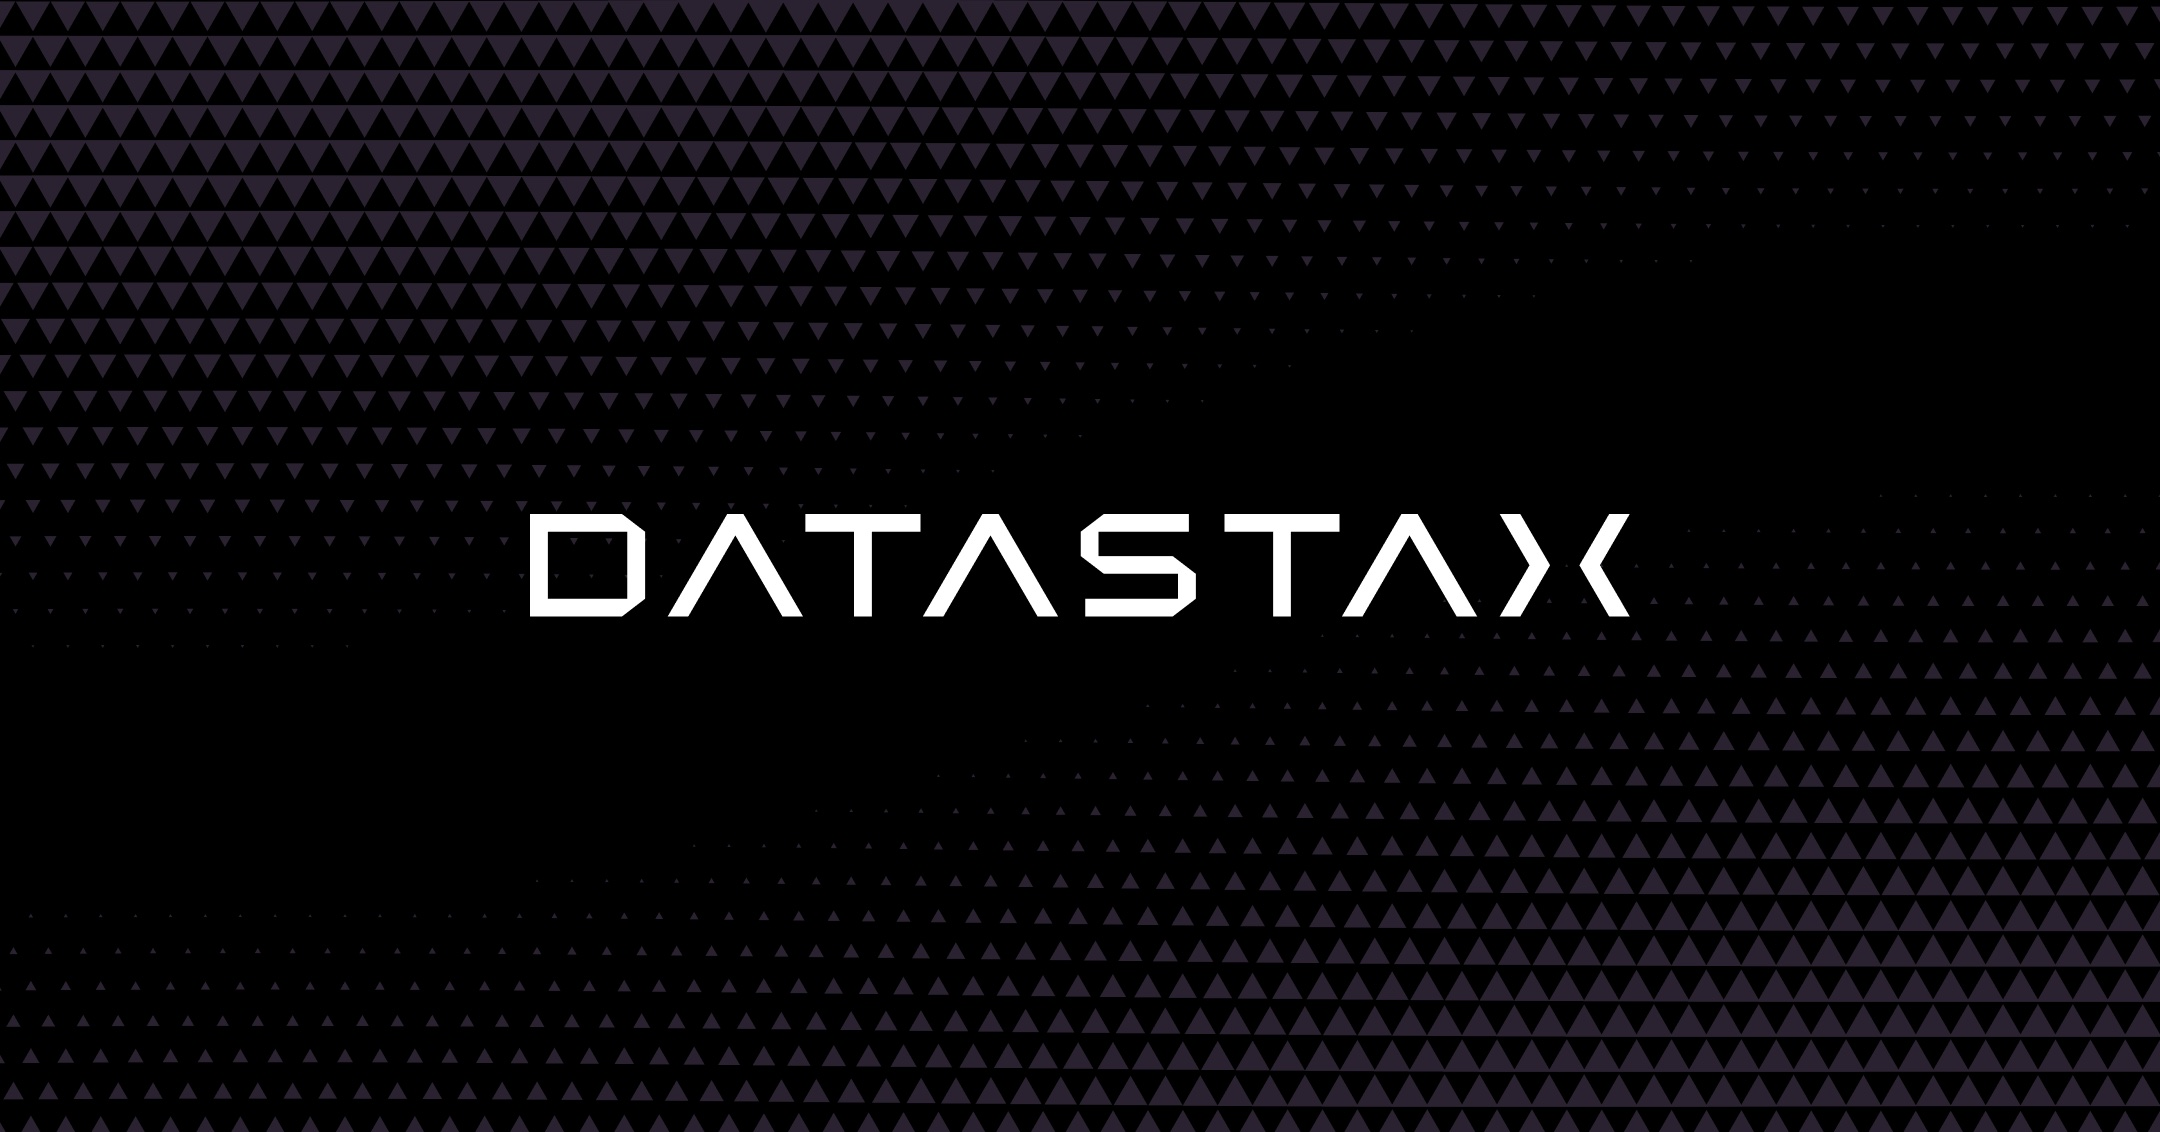 Forrester Report : DataStax Distributed Databases In Cloud Applications